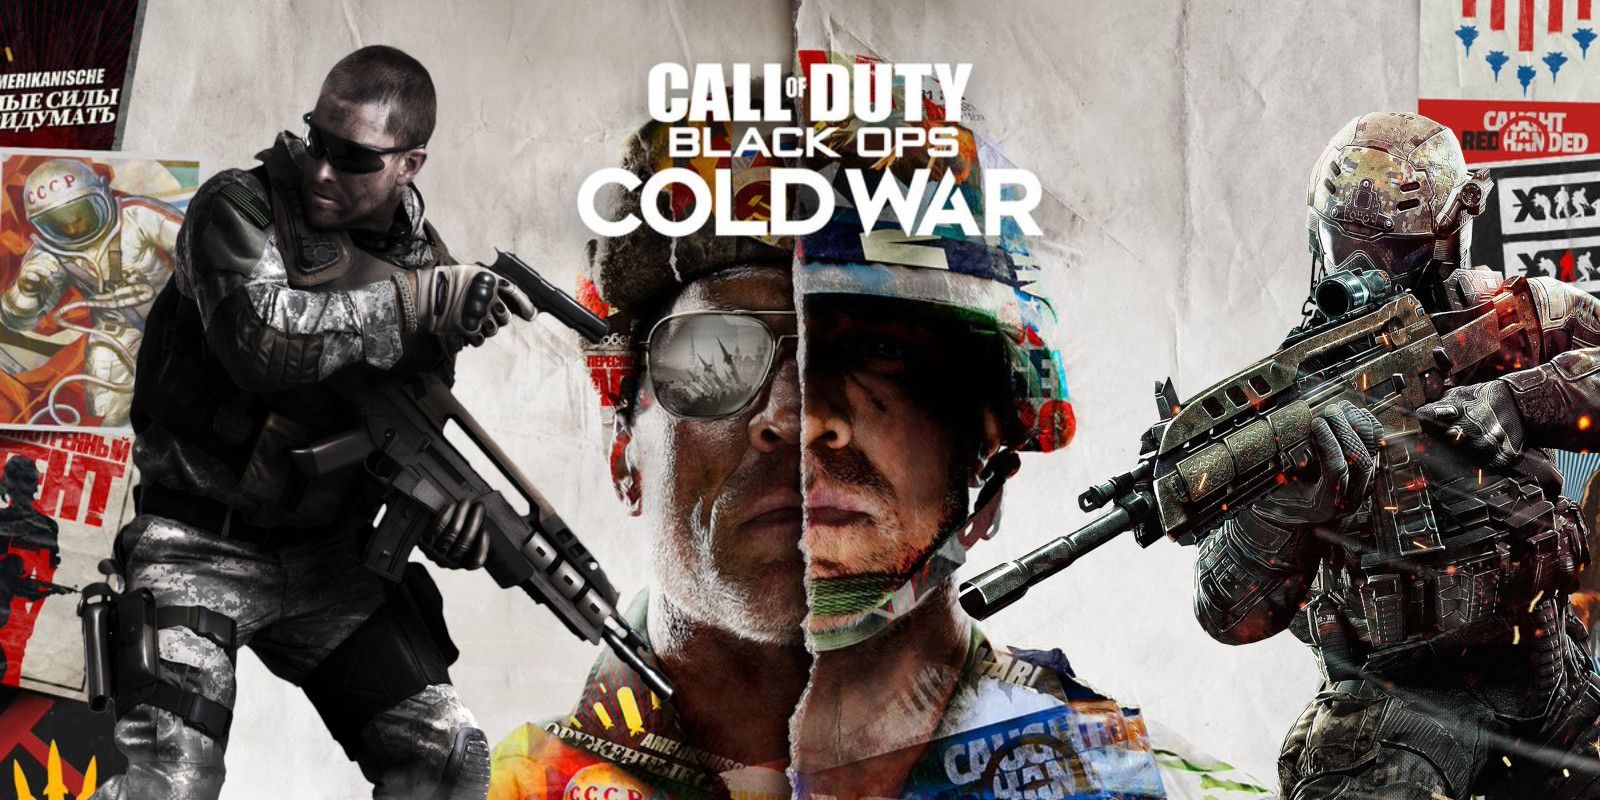 Duty war black cold of ops call